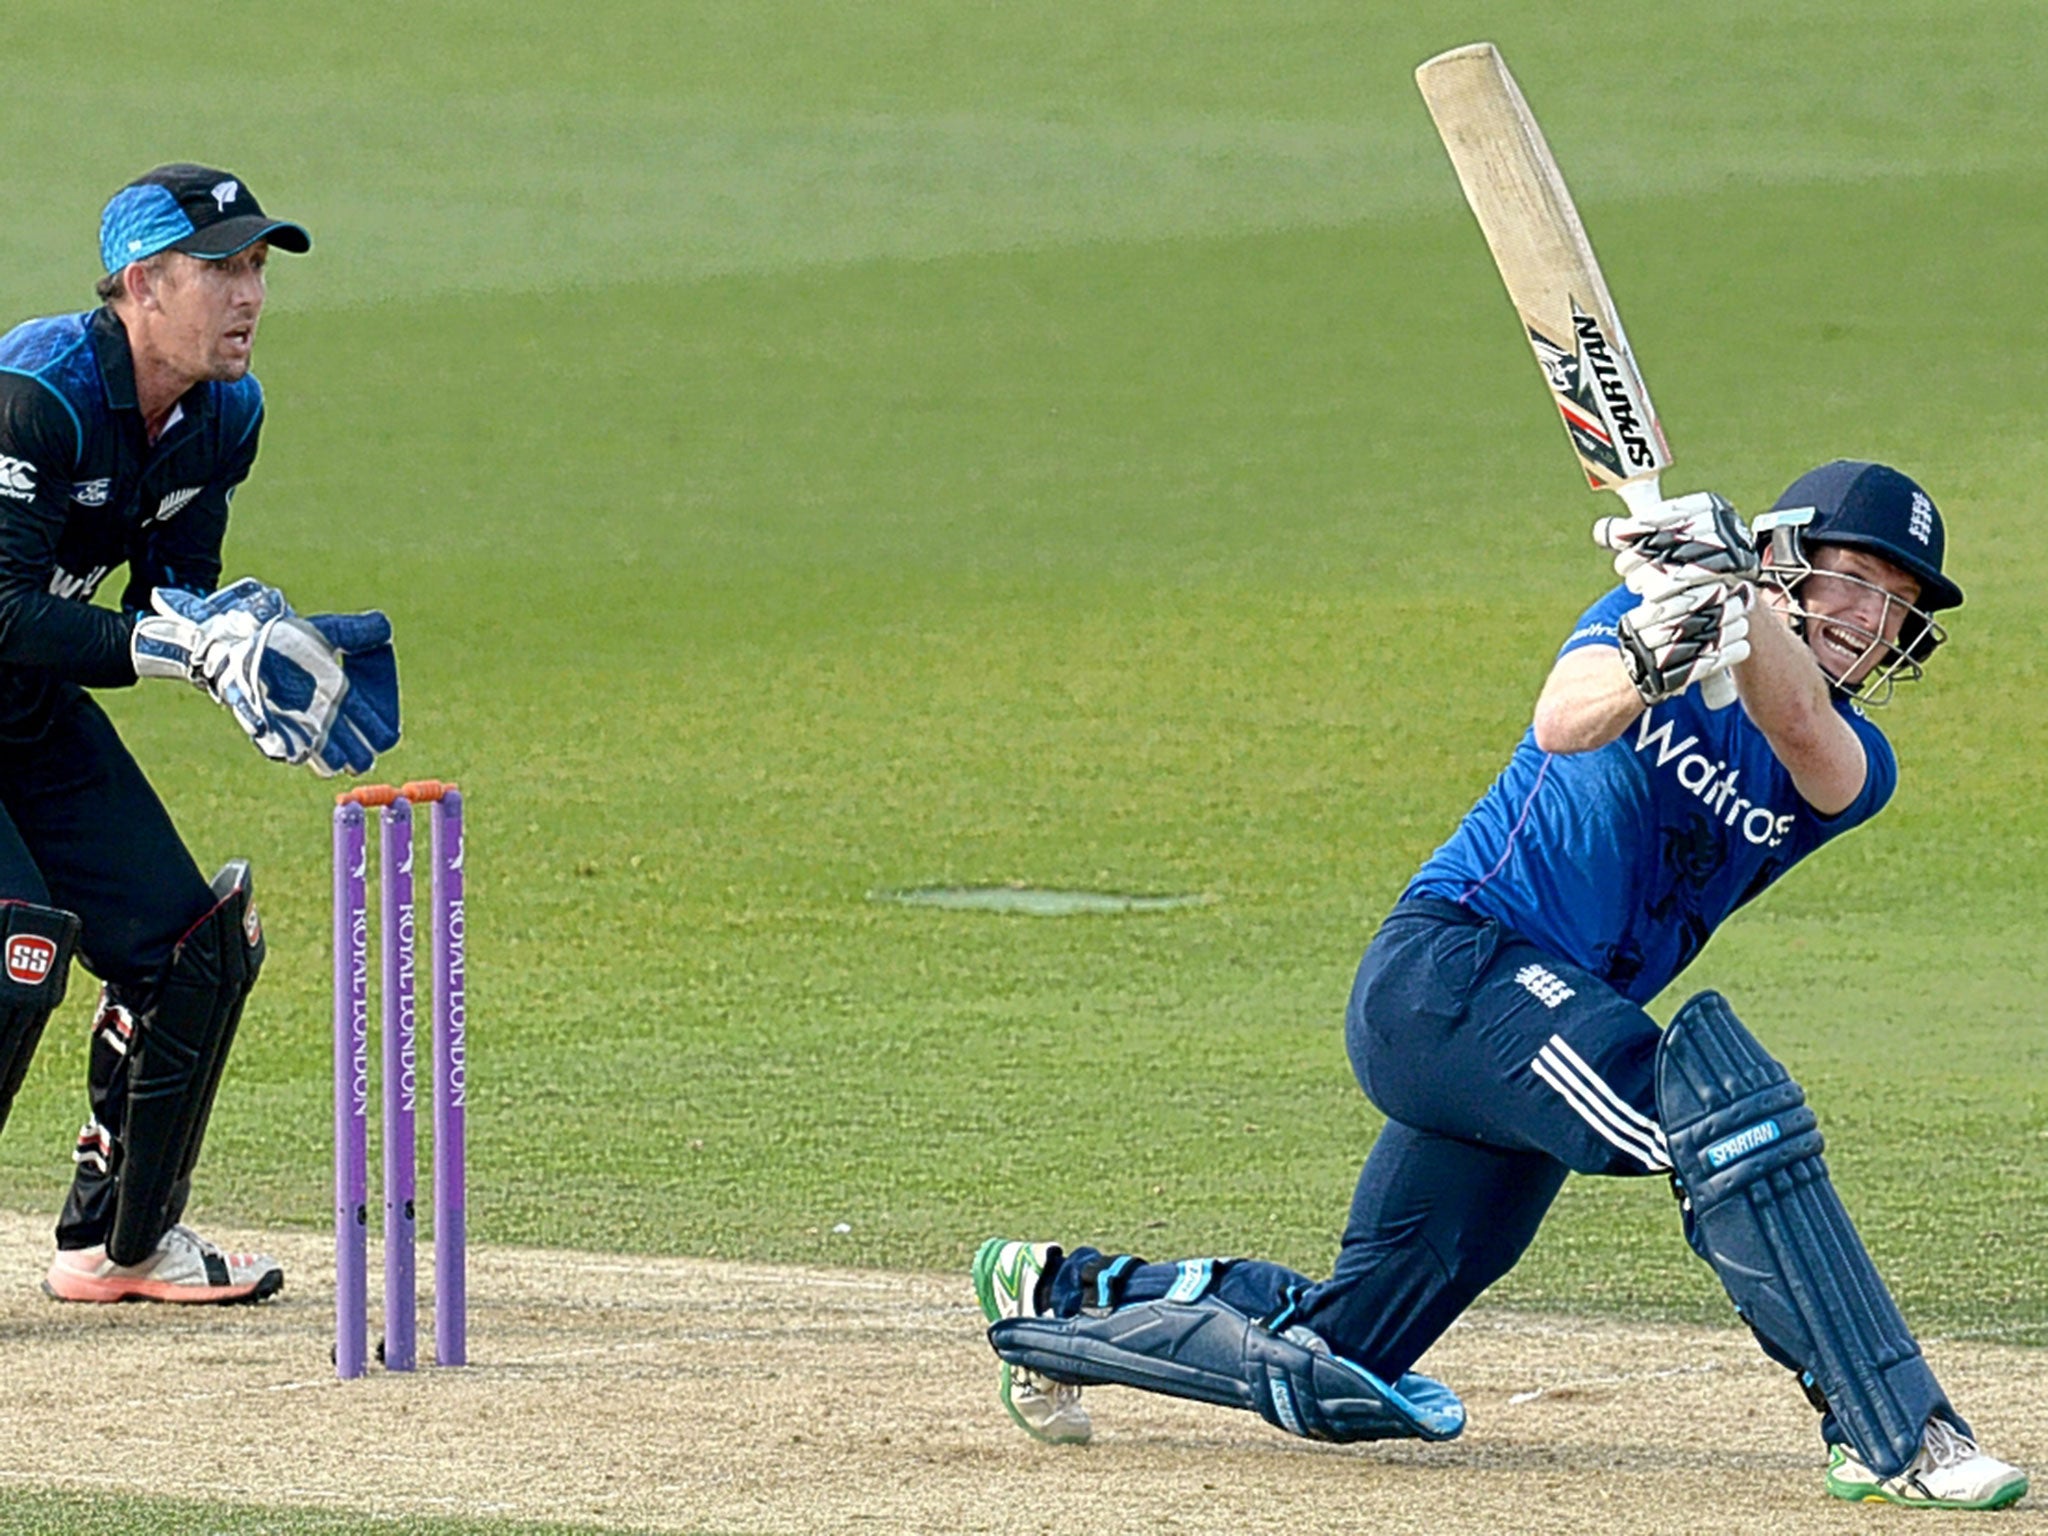 Eoin Morgan in full flow for England at The Oval on Friday